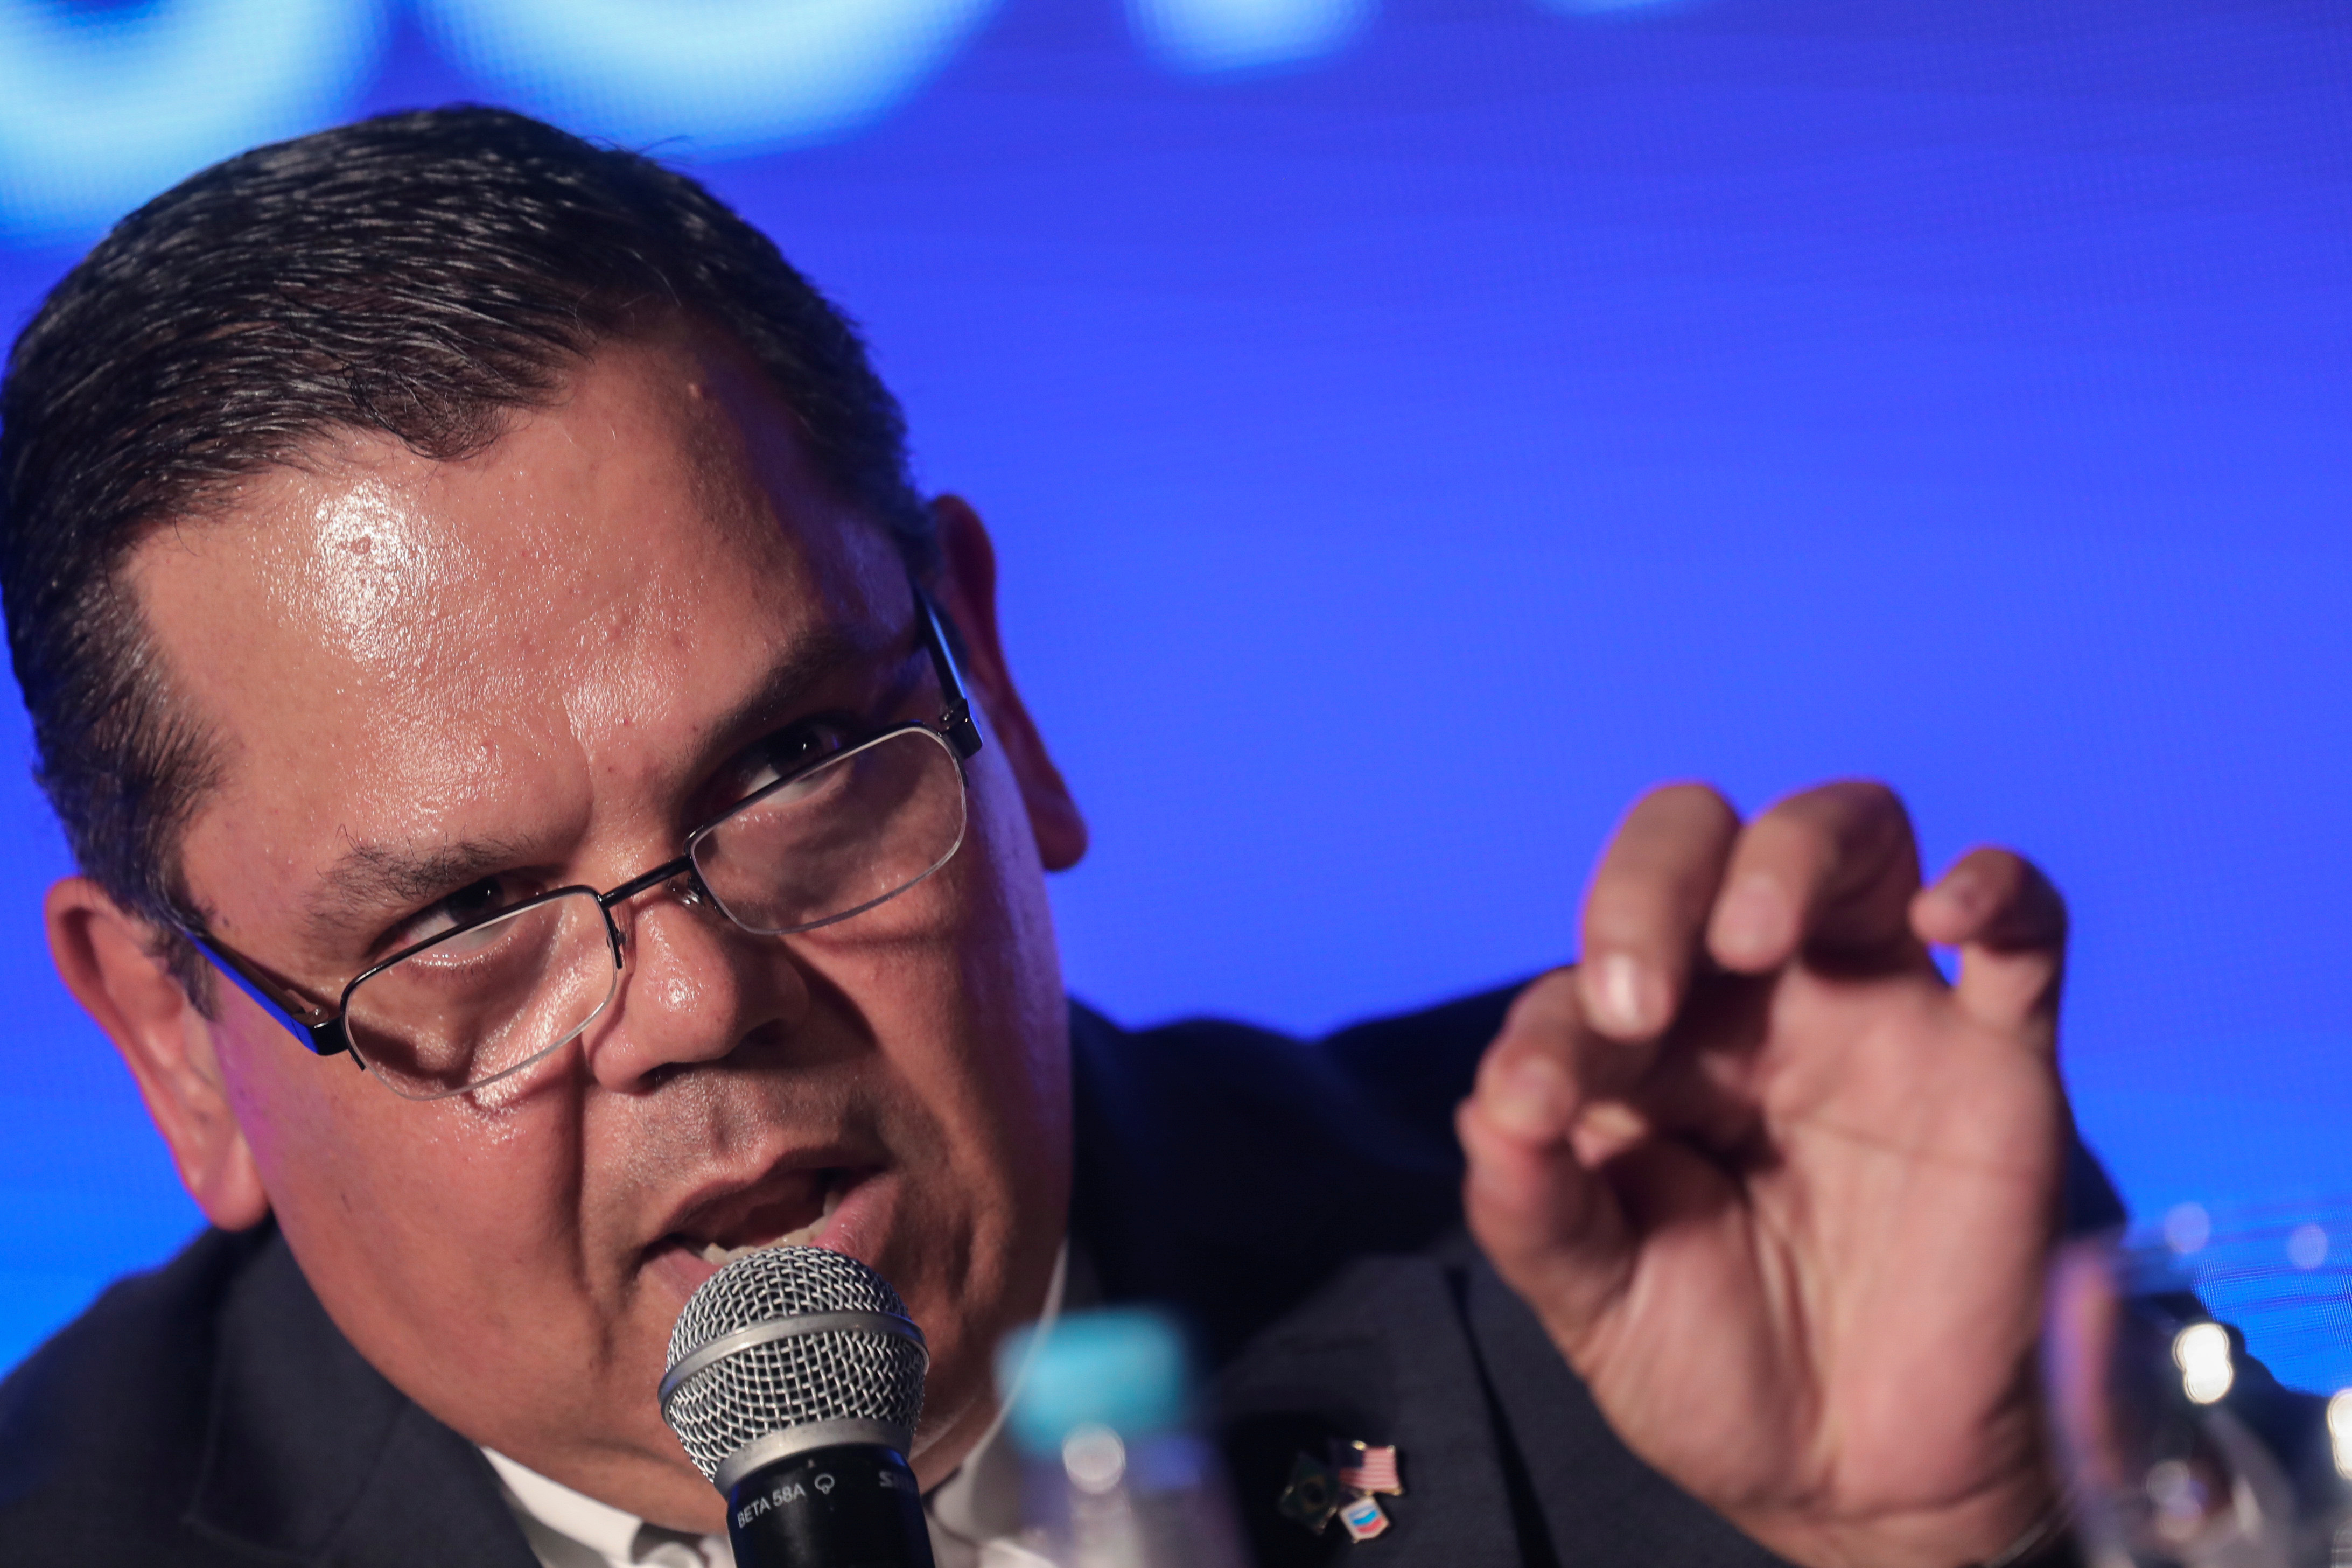 Mariano Vela, head of operations of Chevron in Brazil speaks during the 2019 OTC Brasil Conference in Rio de Janeiro